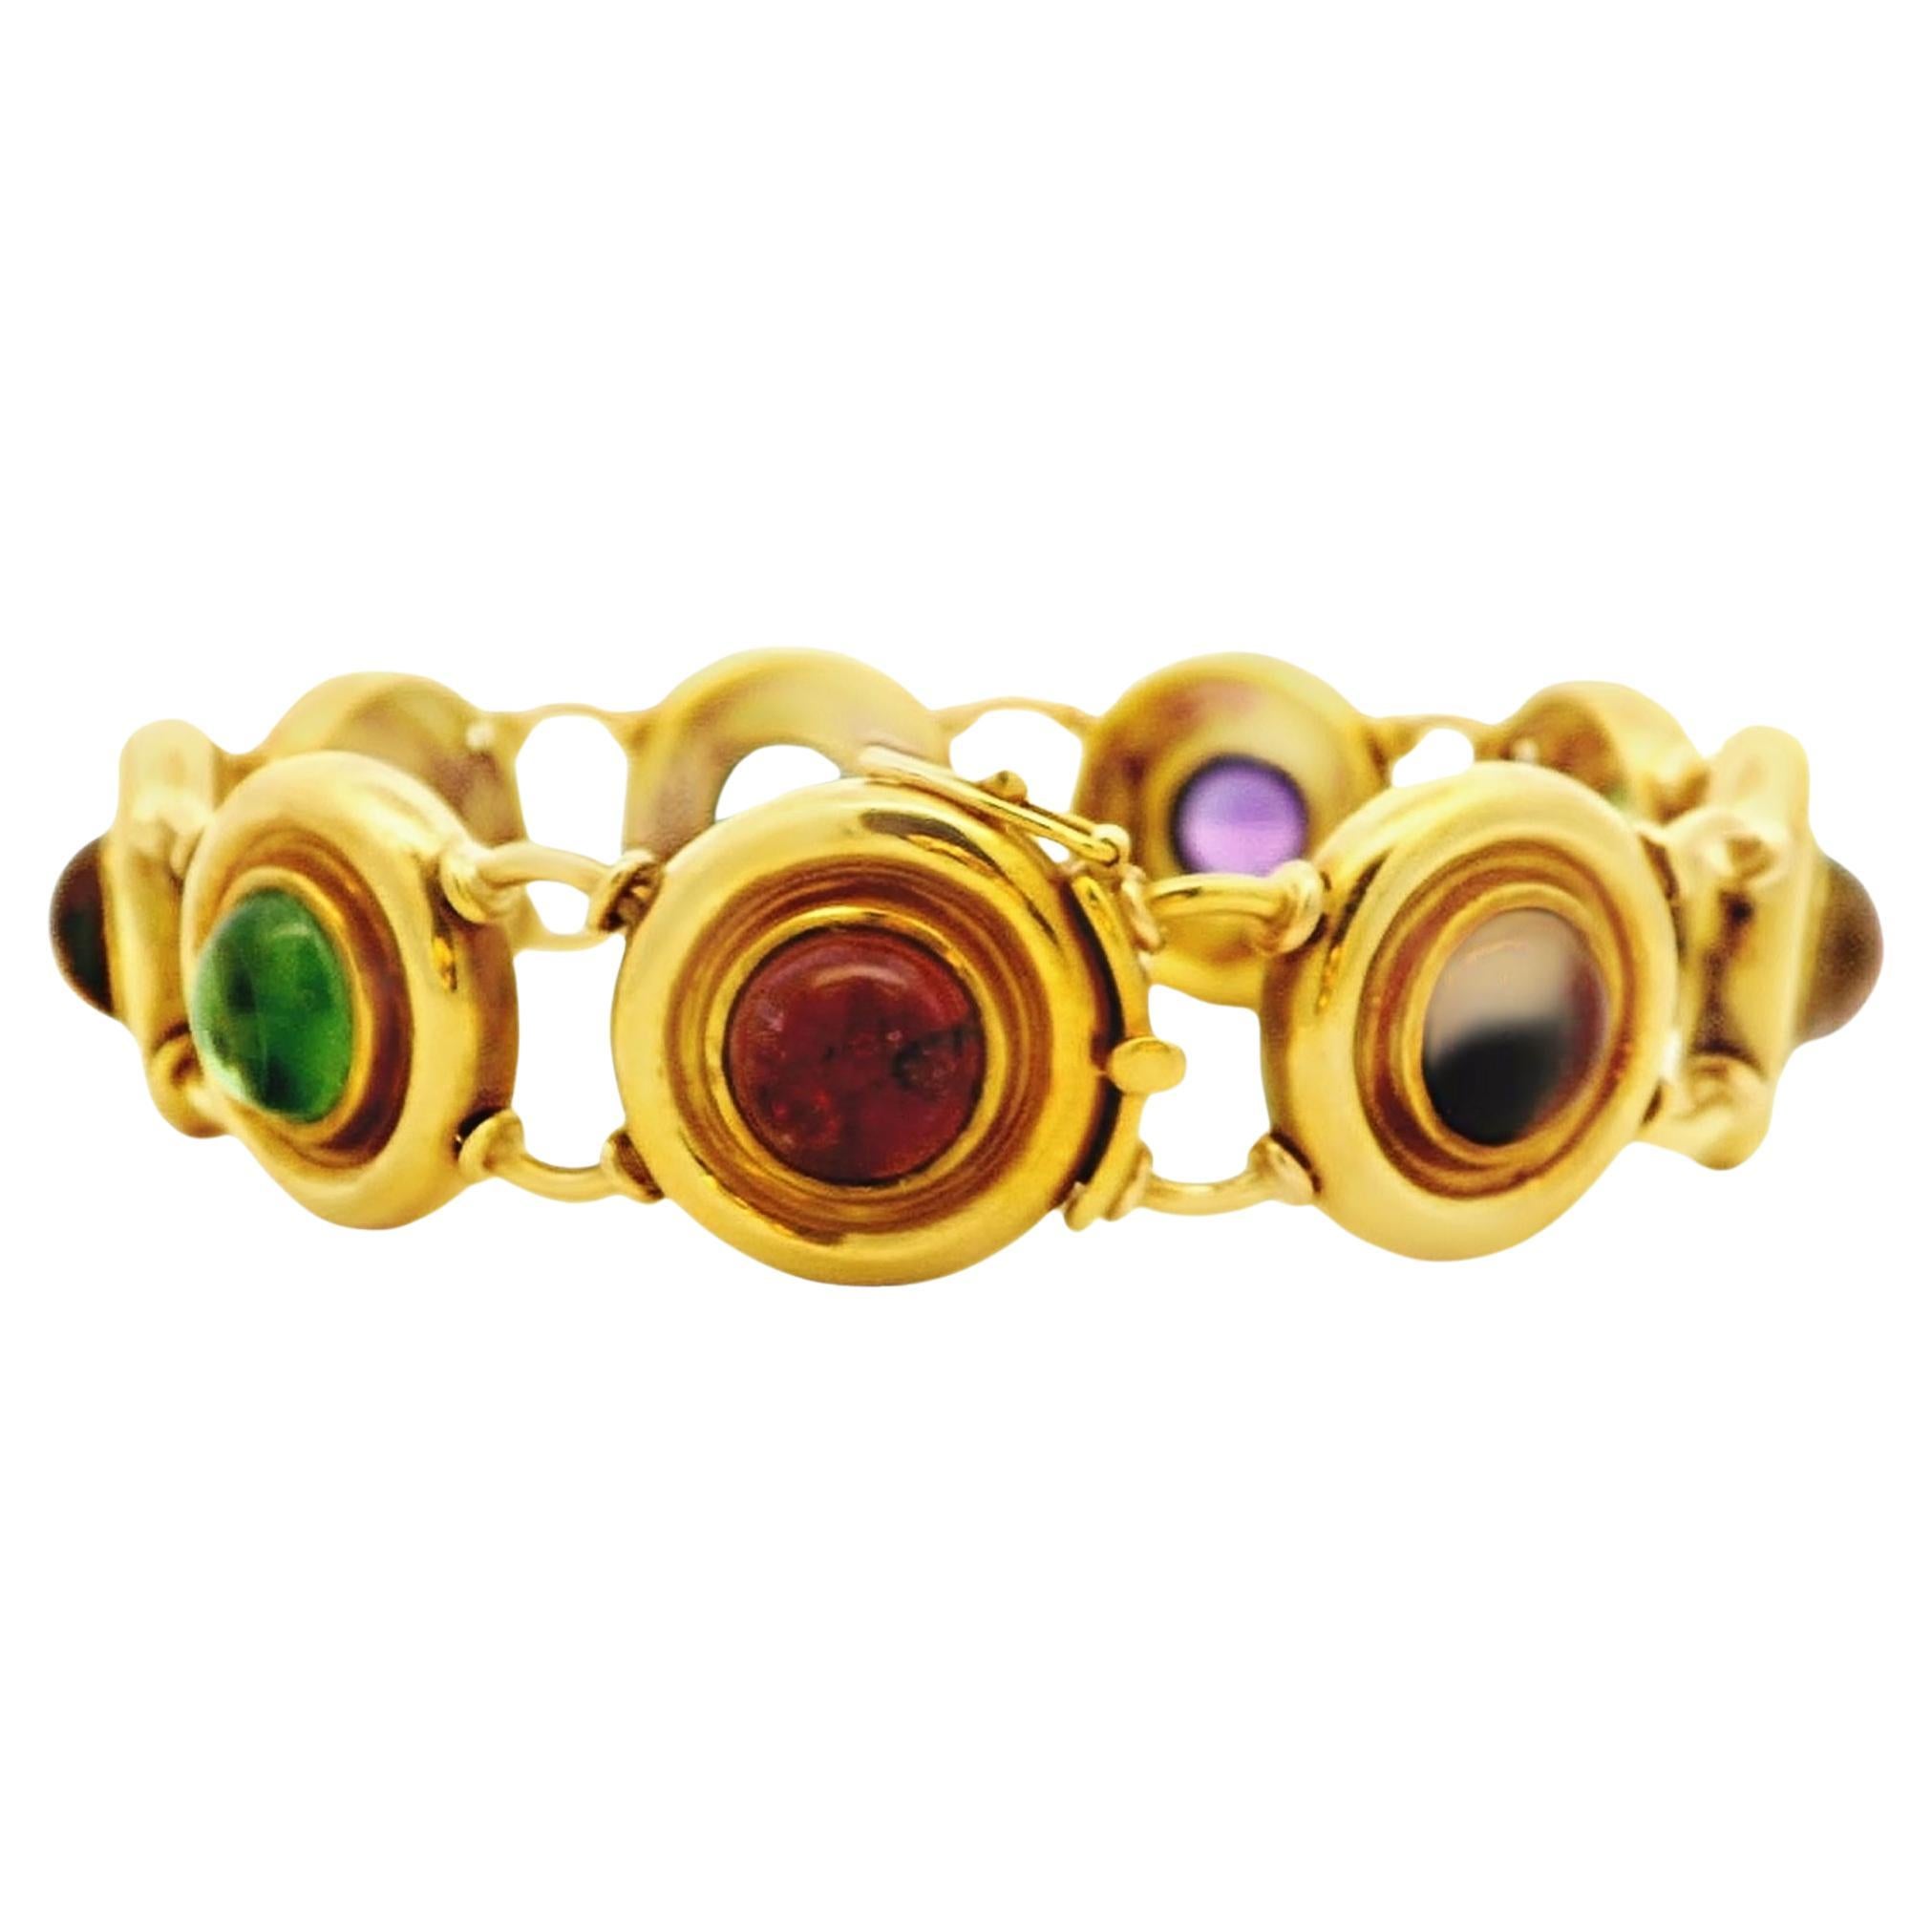 Classically designed and offered by Alex & Co. This wonderful handcrafted 18 Karat yellow gold bracelet is composed of multi color bezel set round cabochons. There are 9 stones in total, collectively weighing 20.88ctw. Each stone is set in a large